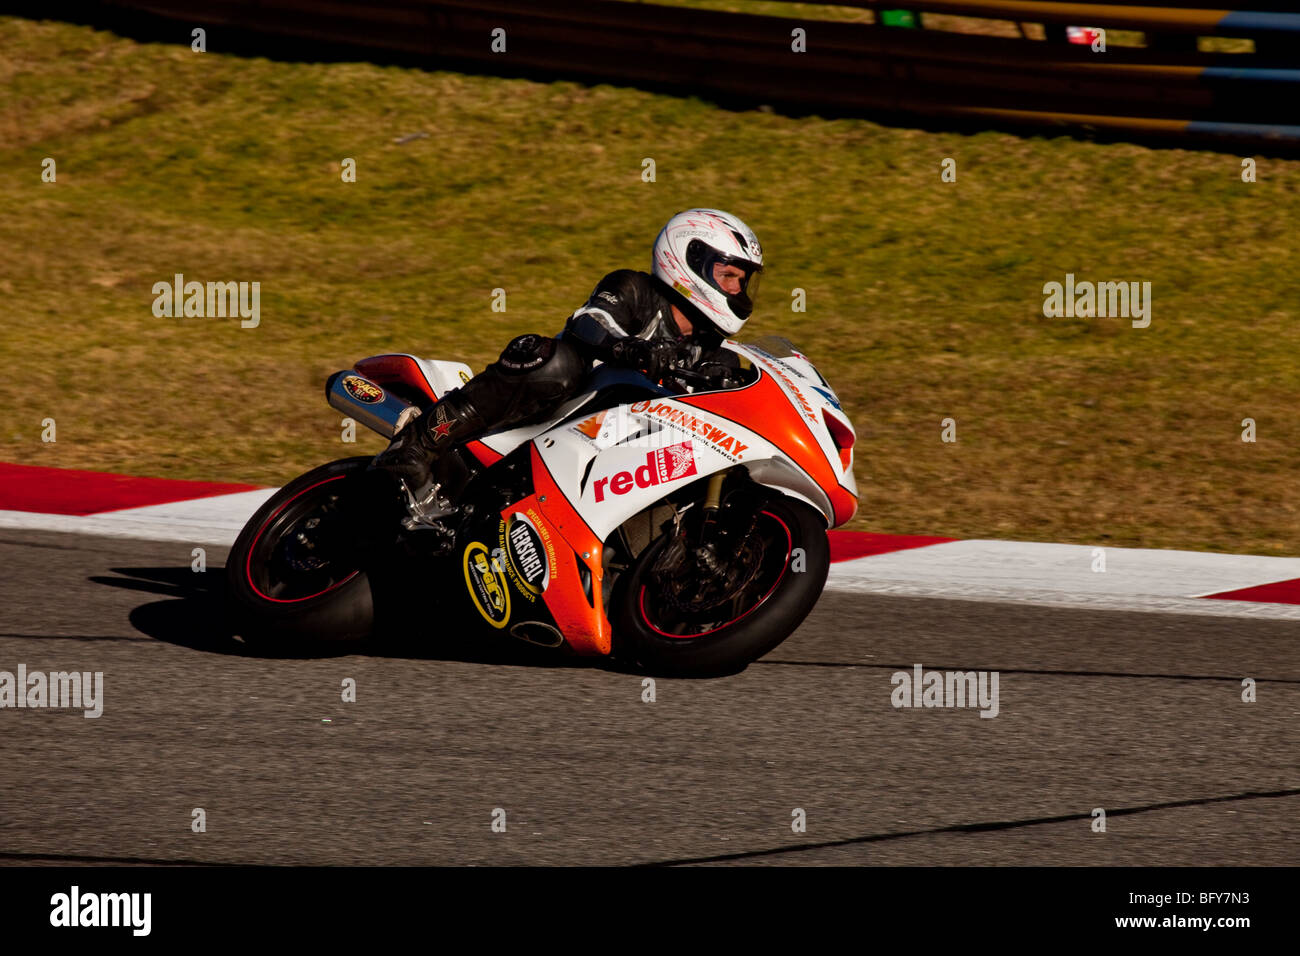 Motorcycle racing at the Kyalami Speedway in South Africa Stock Photo